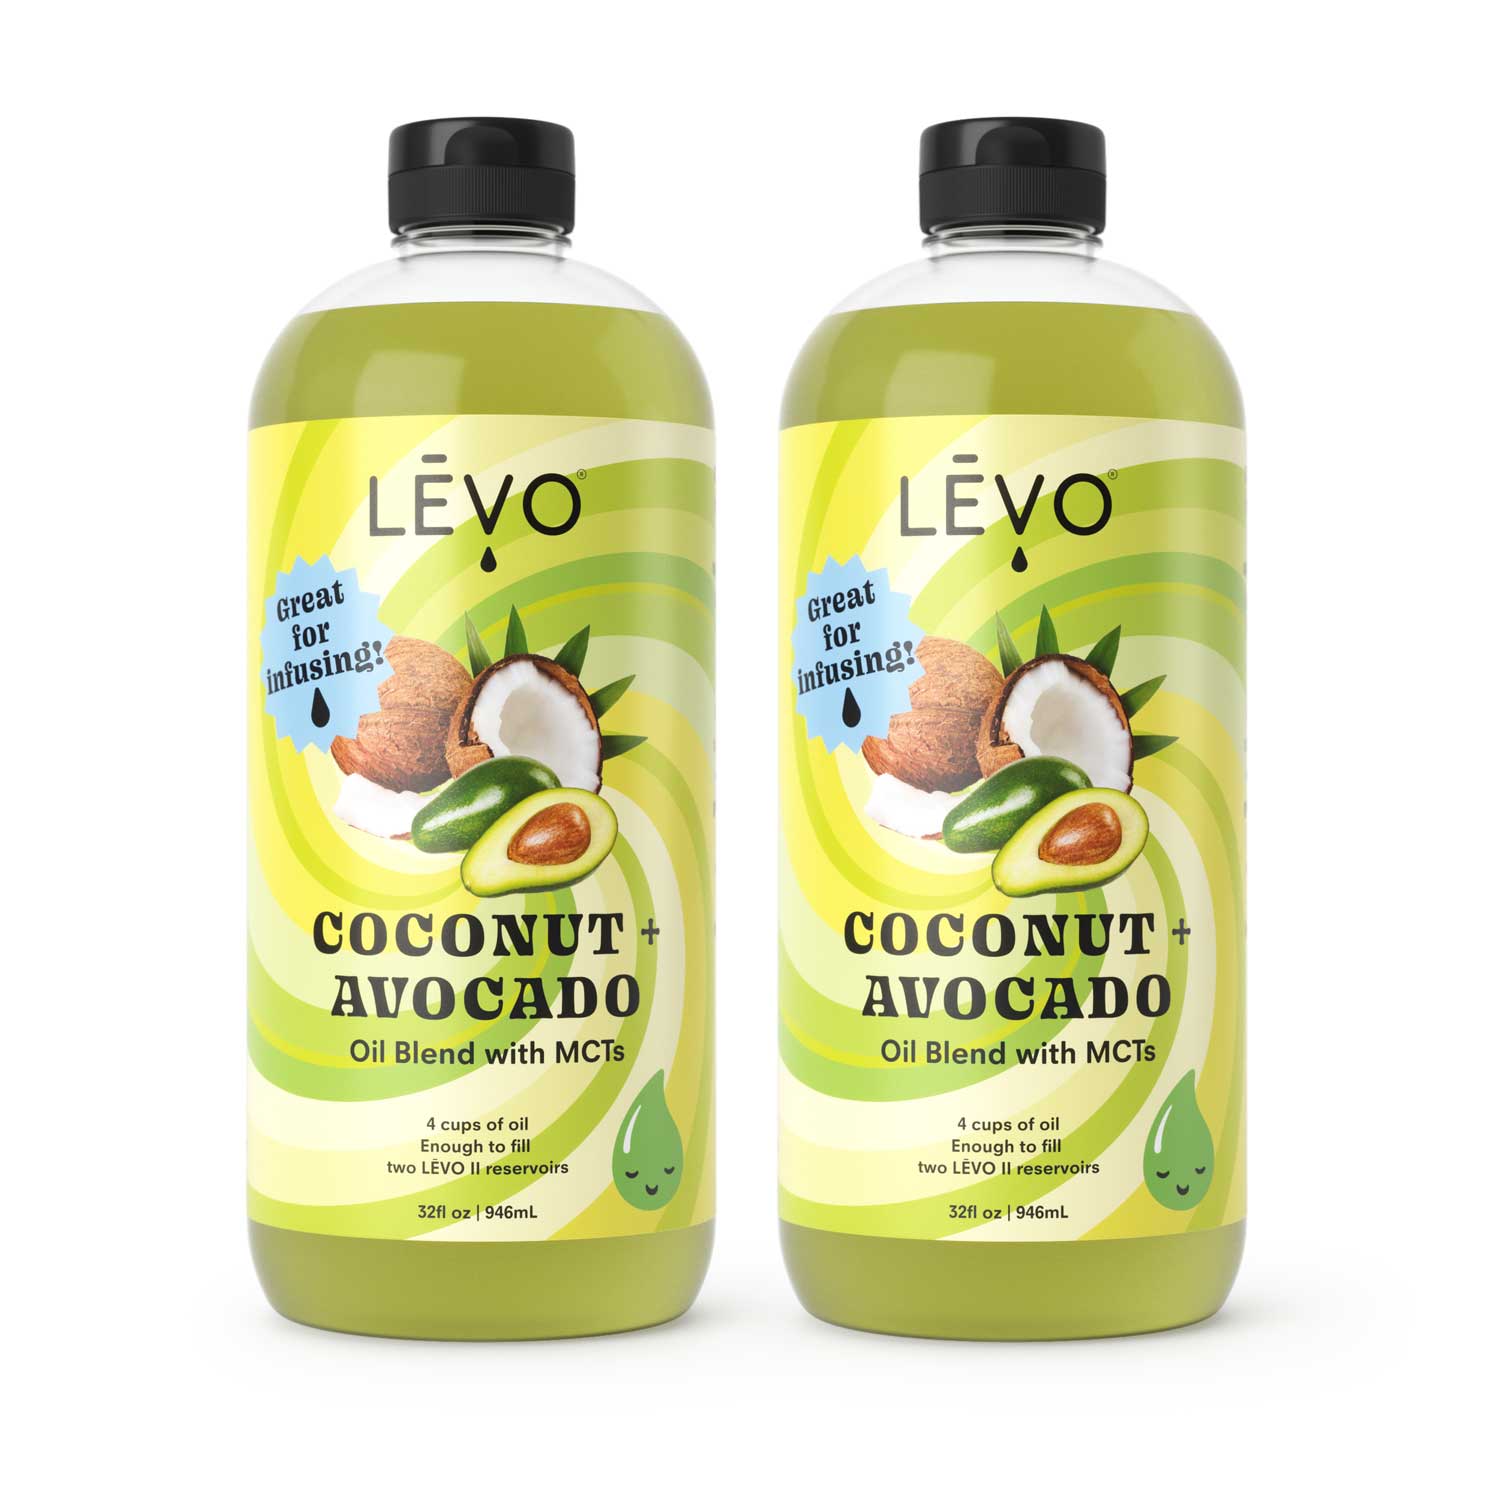 LEVO is your one stop shop for your favorite infusion machine, LEVO II, and the best high quality oils to use with your machine. Try this Coconut plus Avocado oil blend with MCTs. Great for infusing! LĒVO Coconut Avocado Blend Infusion Oil: Versatile and heat-resistant cooking oil.